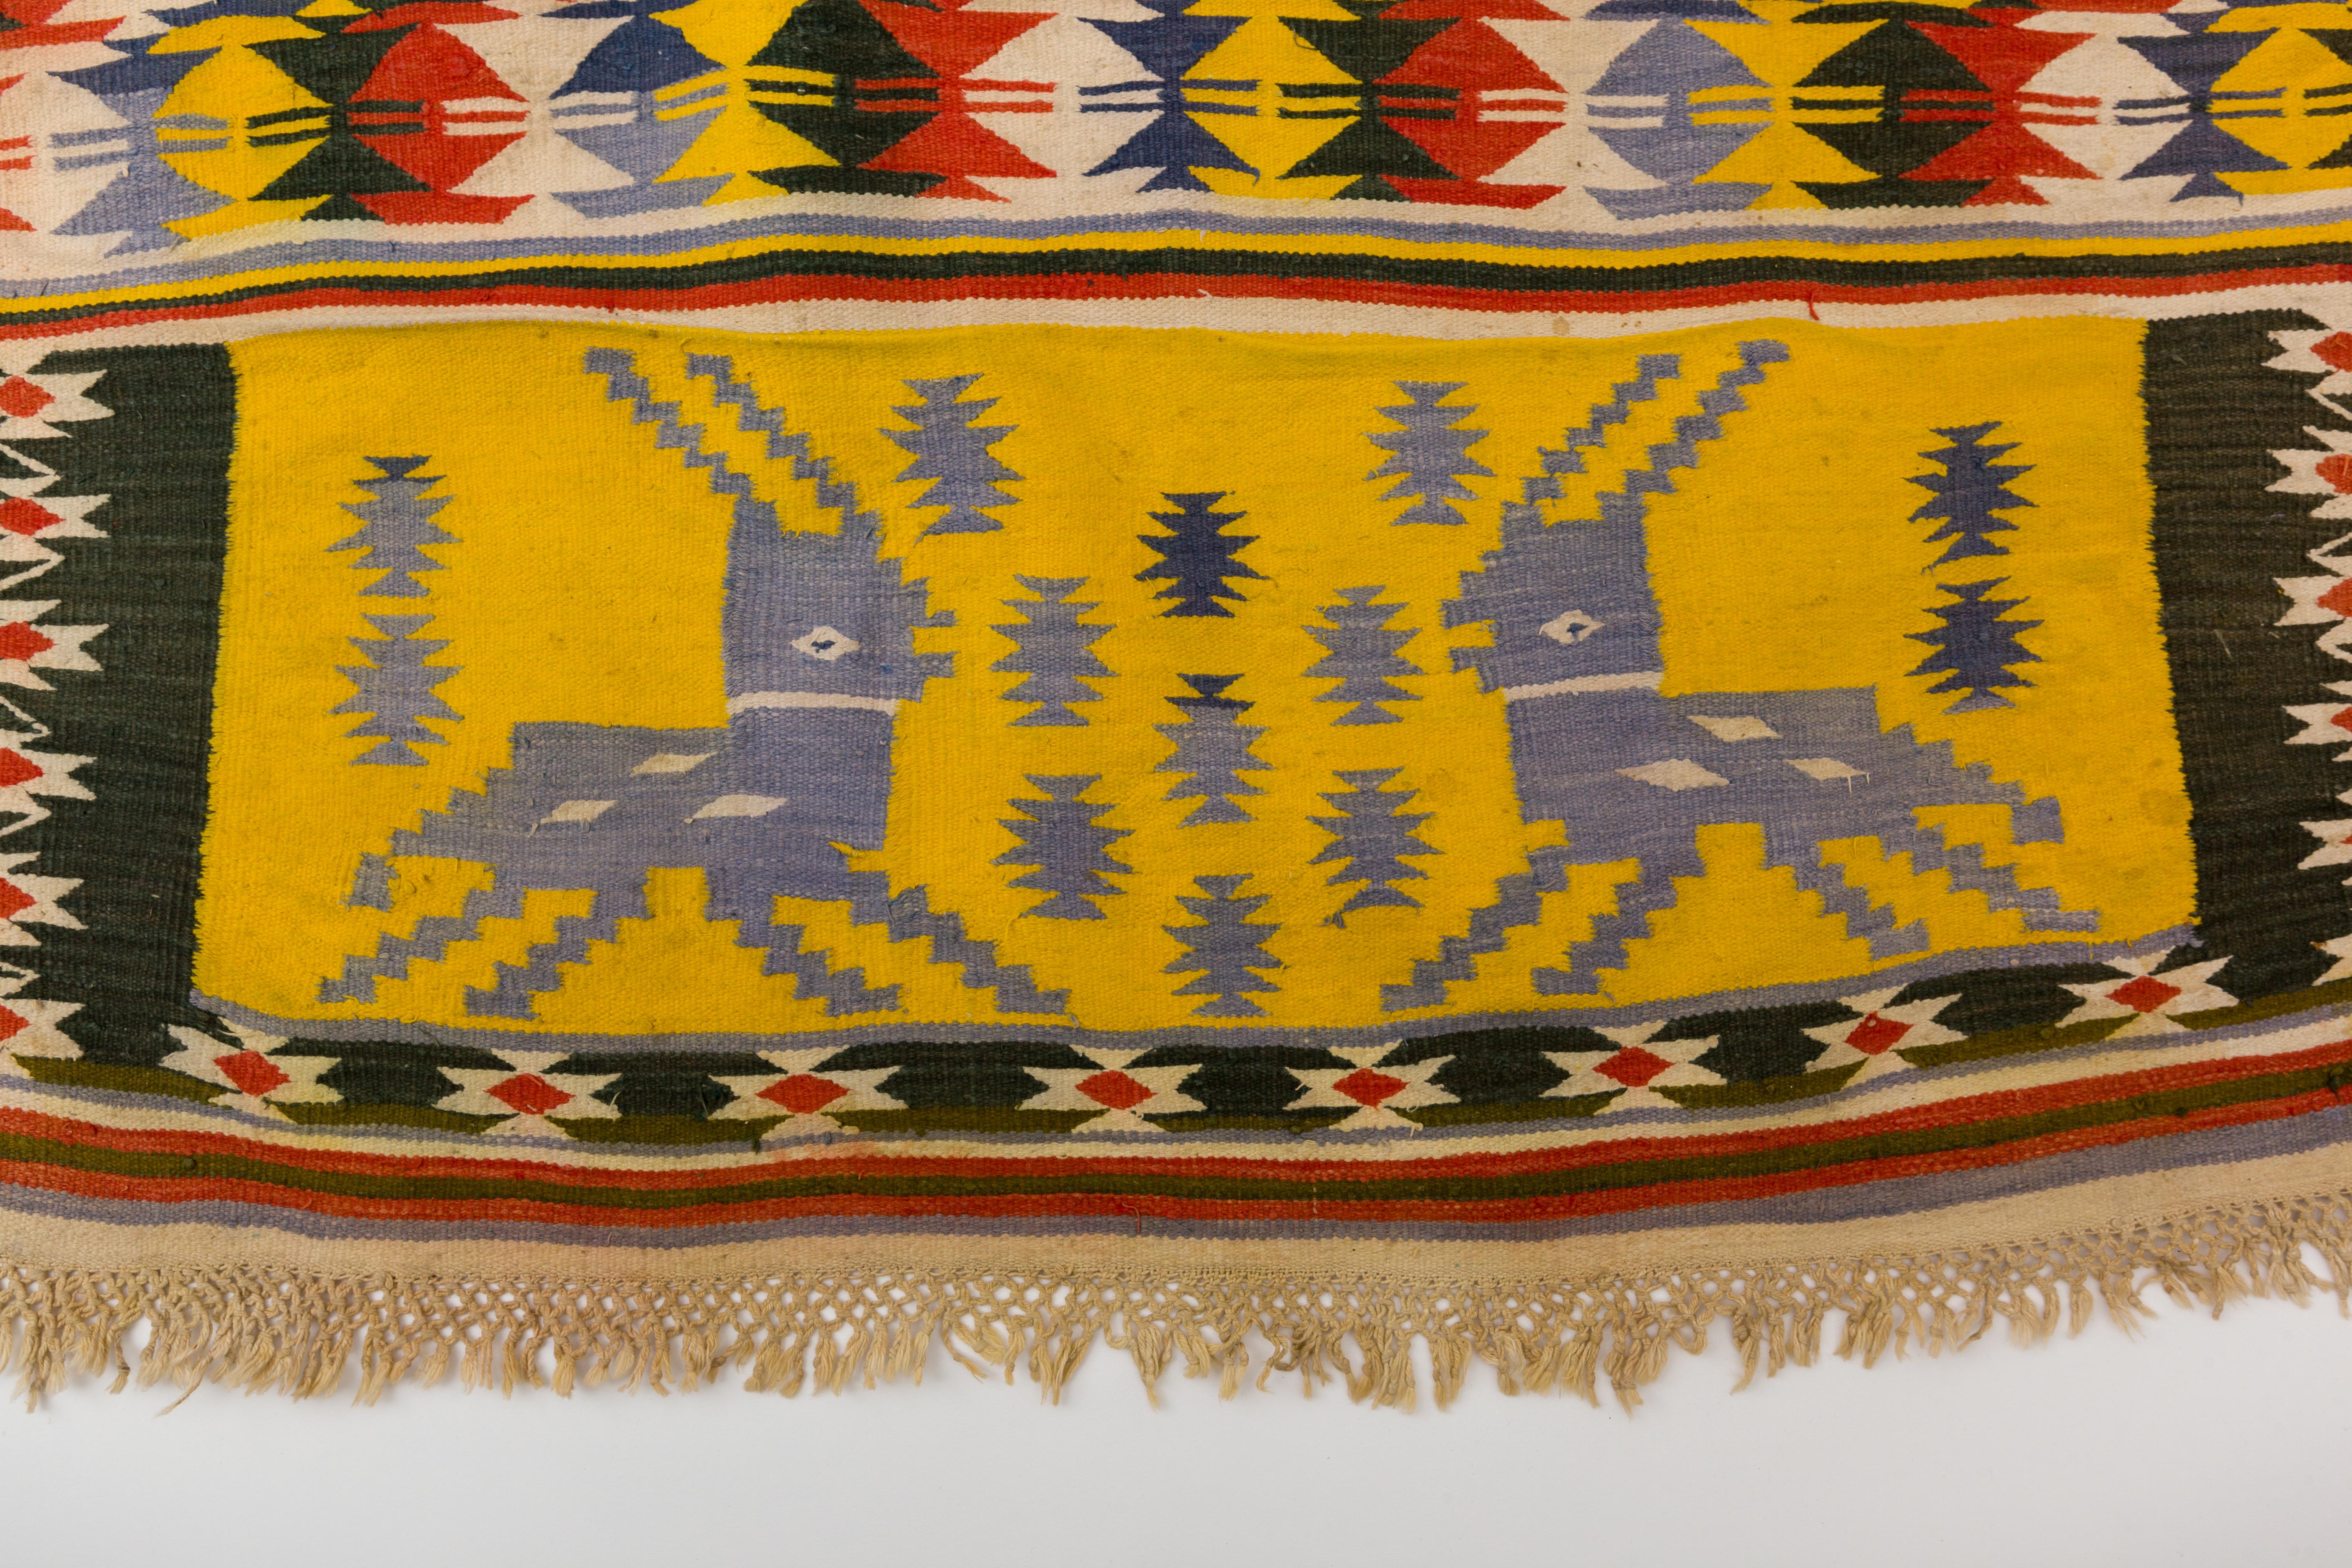 20th Century Tribal Rajasthani Multi-Color Indian Cotton Dhurrie Rug with Deer Motif For Sale